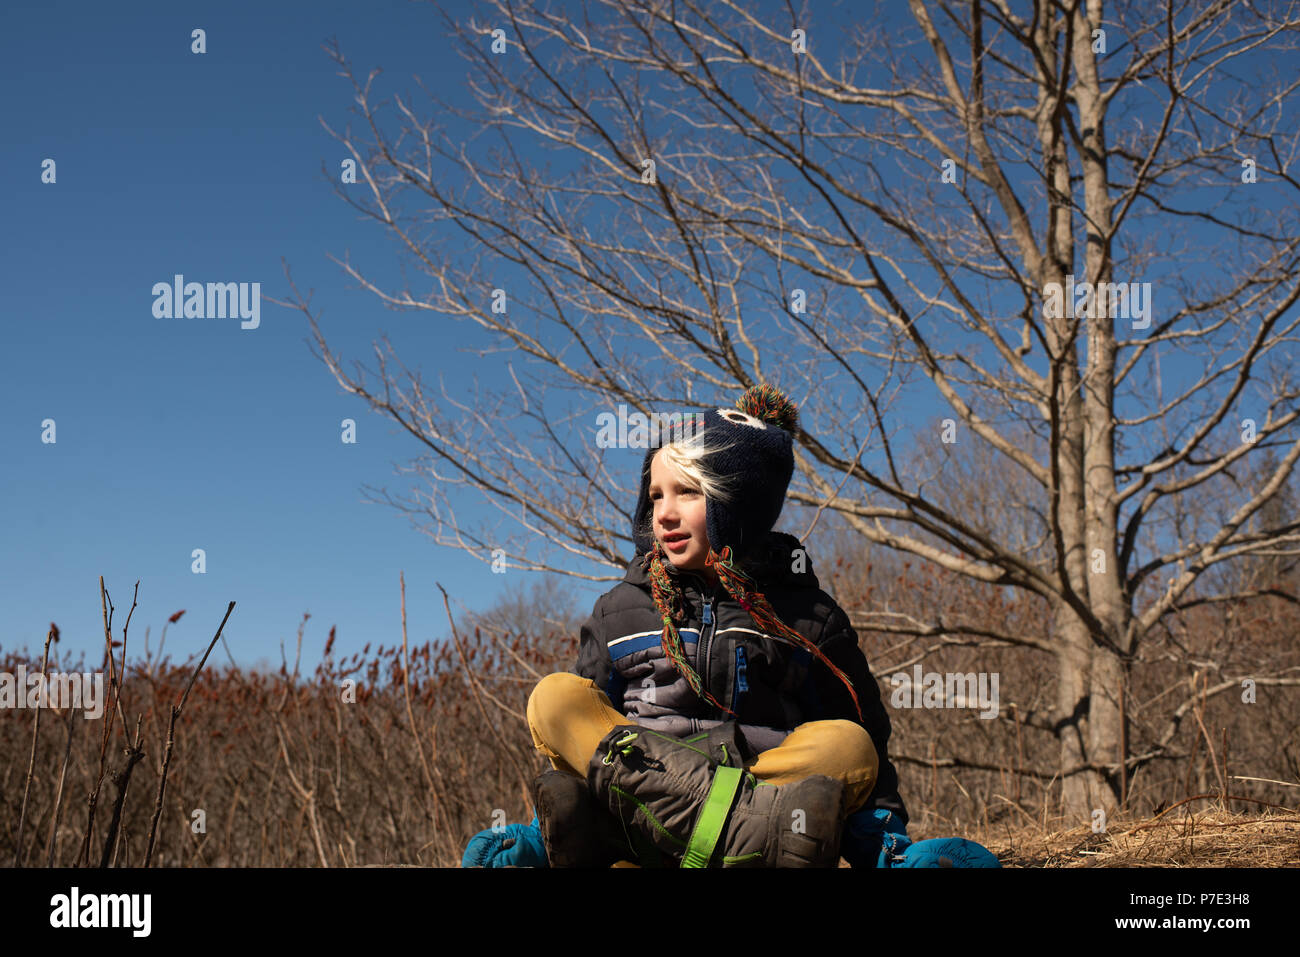 Boy outdoors, wearing winter clothing Stock Photo